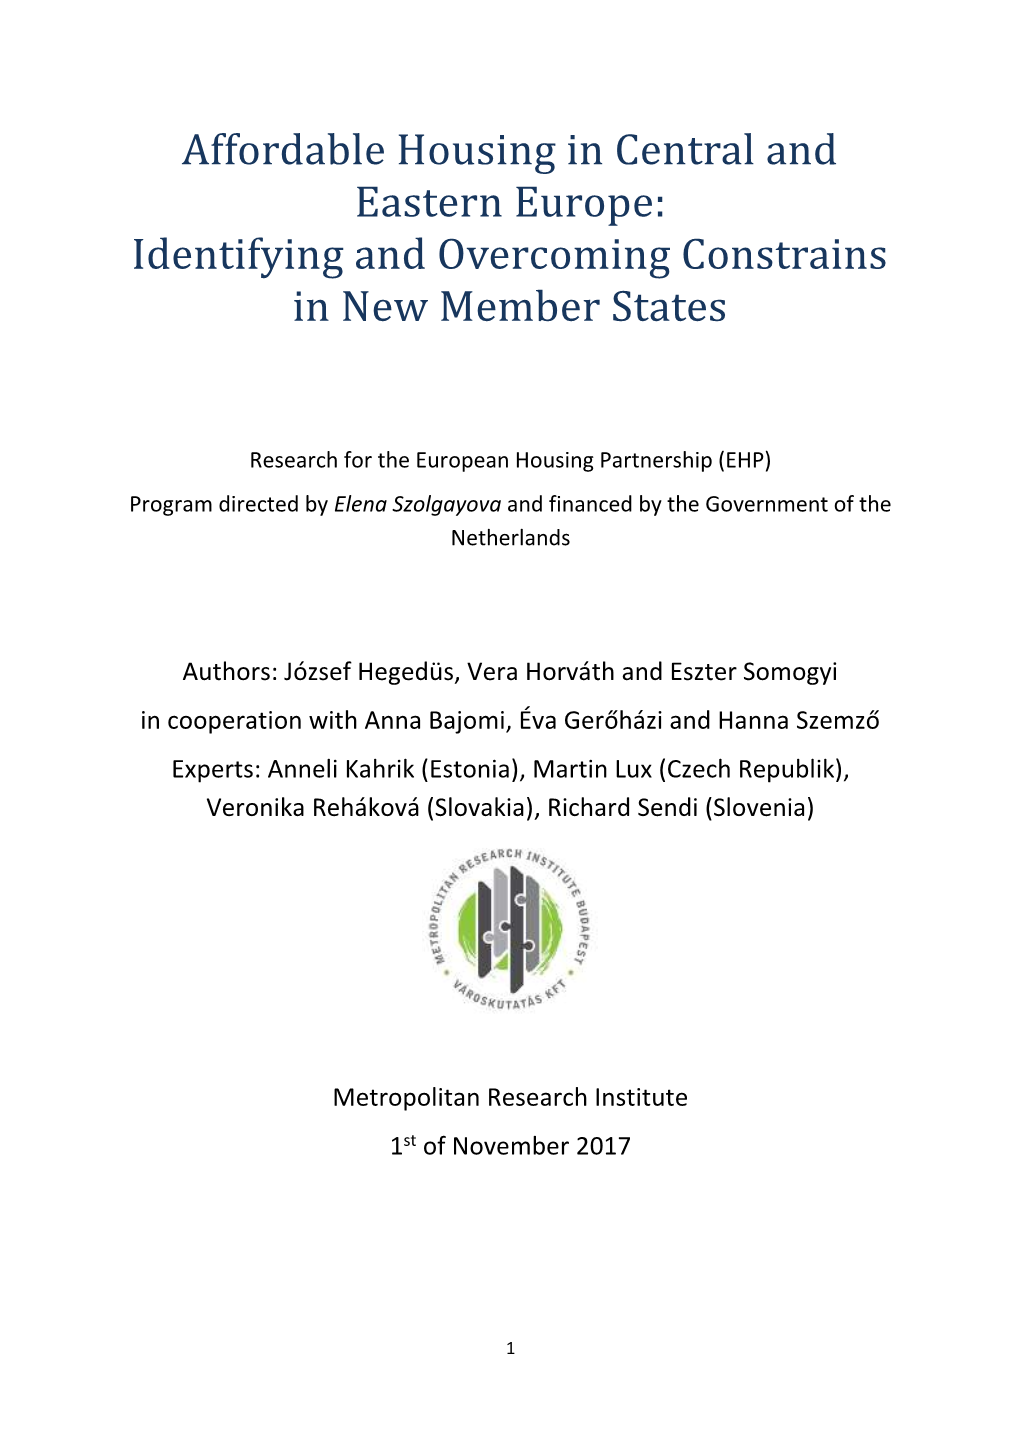 Affordable Housing in Central and Eastern Europe: Identifying and Overcoming Constrains in New Member States